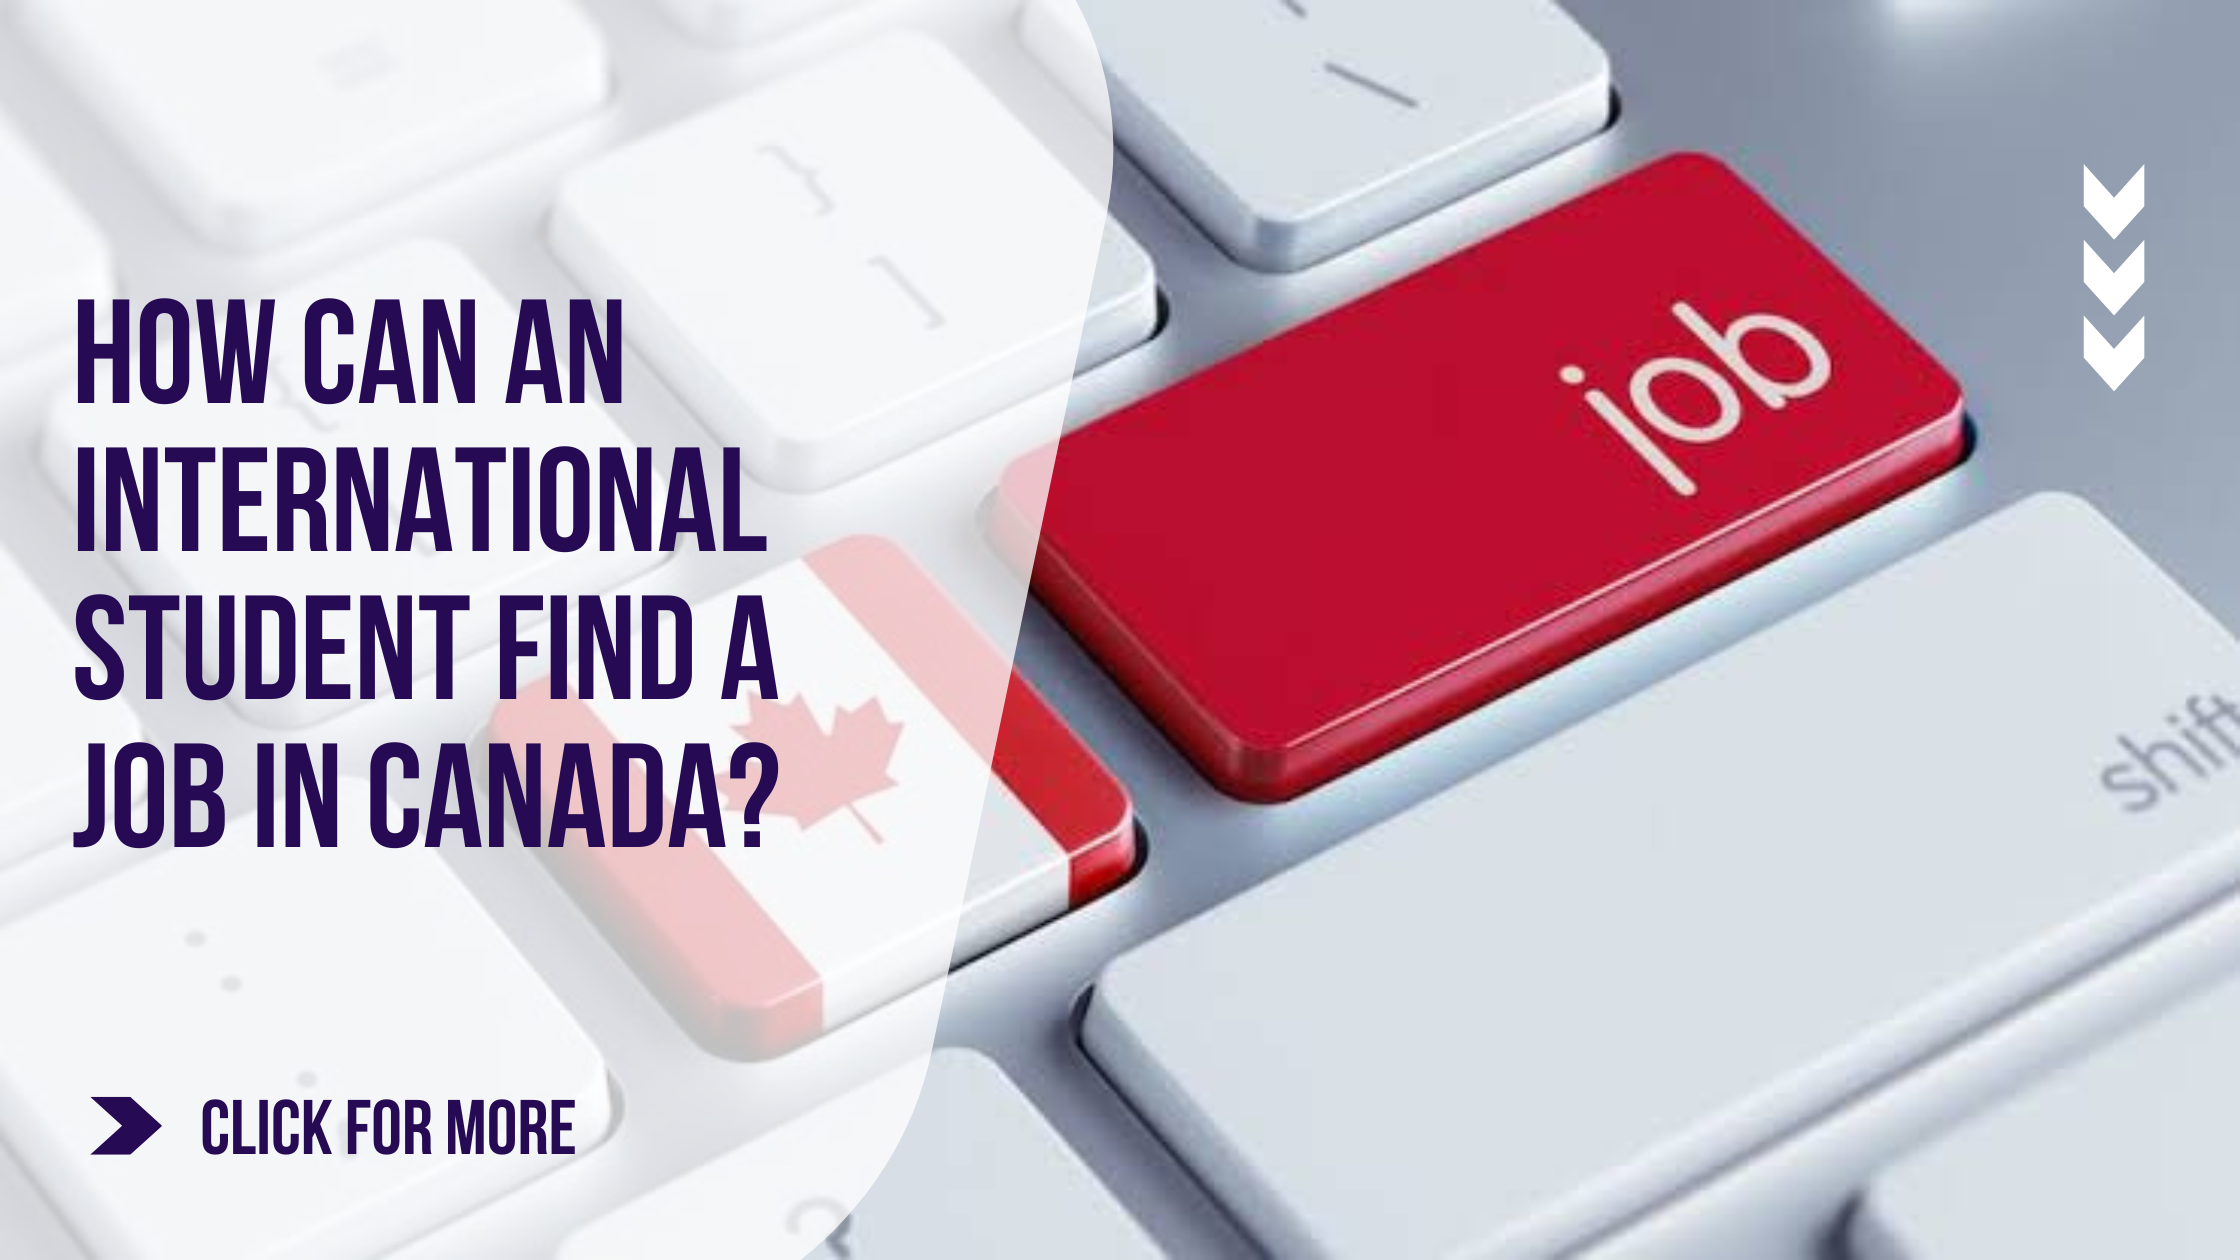 How Can An International Student Find a Job in Canada?